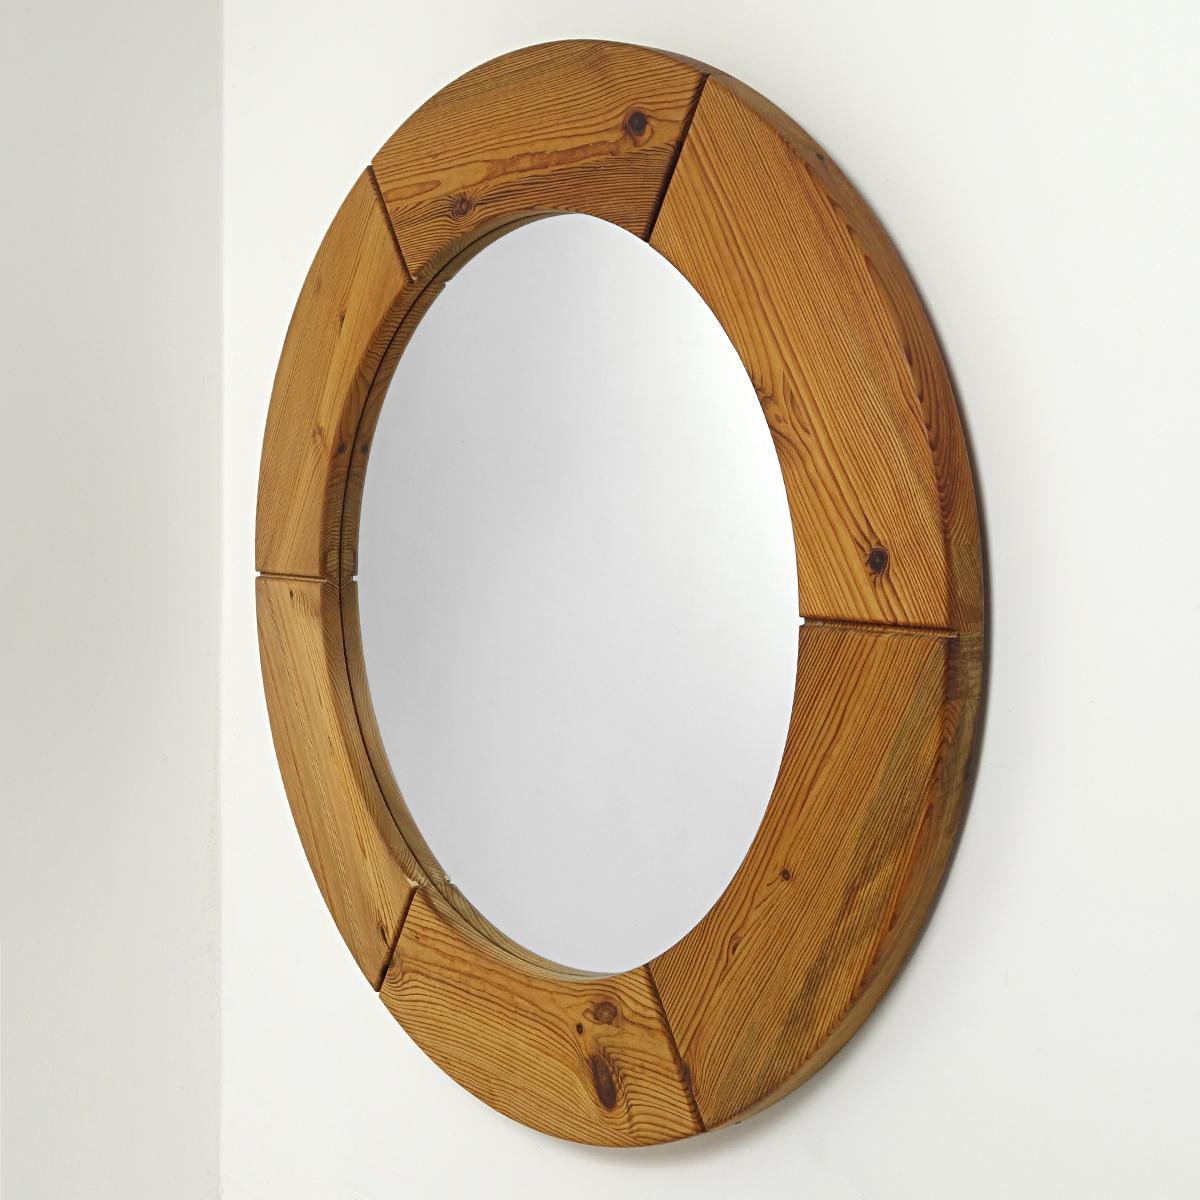 This Swedish mirror has a diameter of 100 cm / 39.4 inch and has a frame made of pine wood that is divided into six sections. 
It was made in the 1950s by Glasmäster Markaryd.